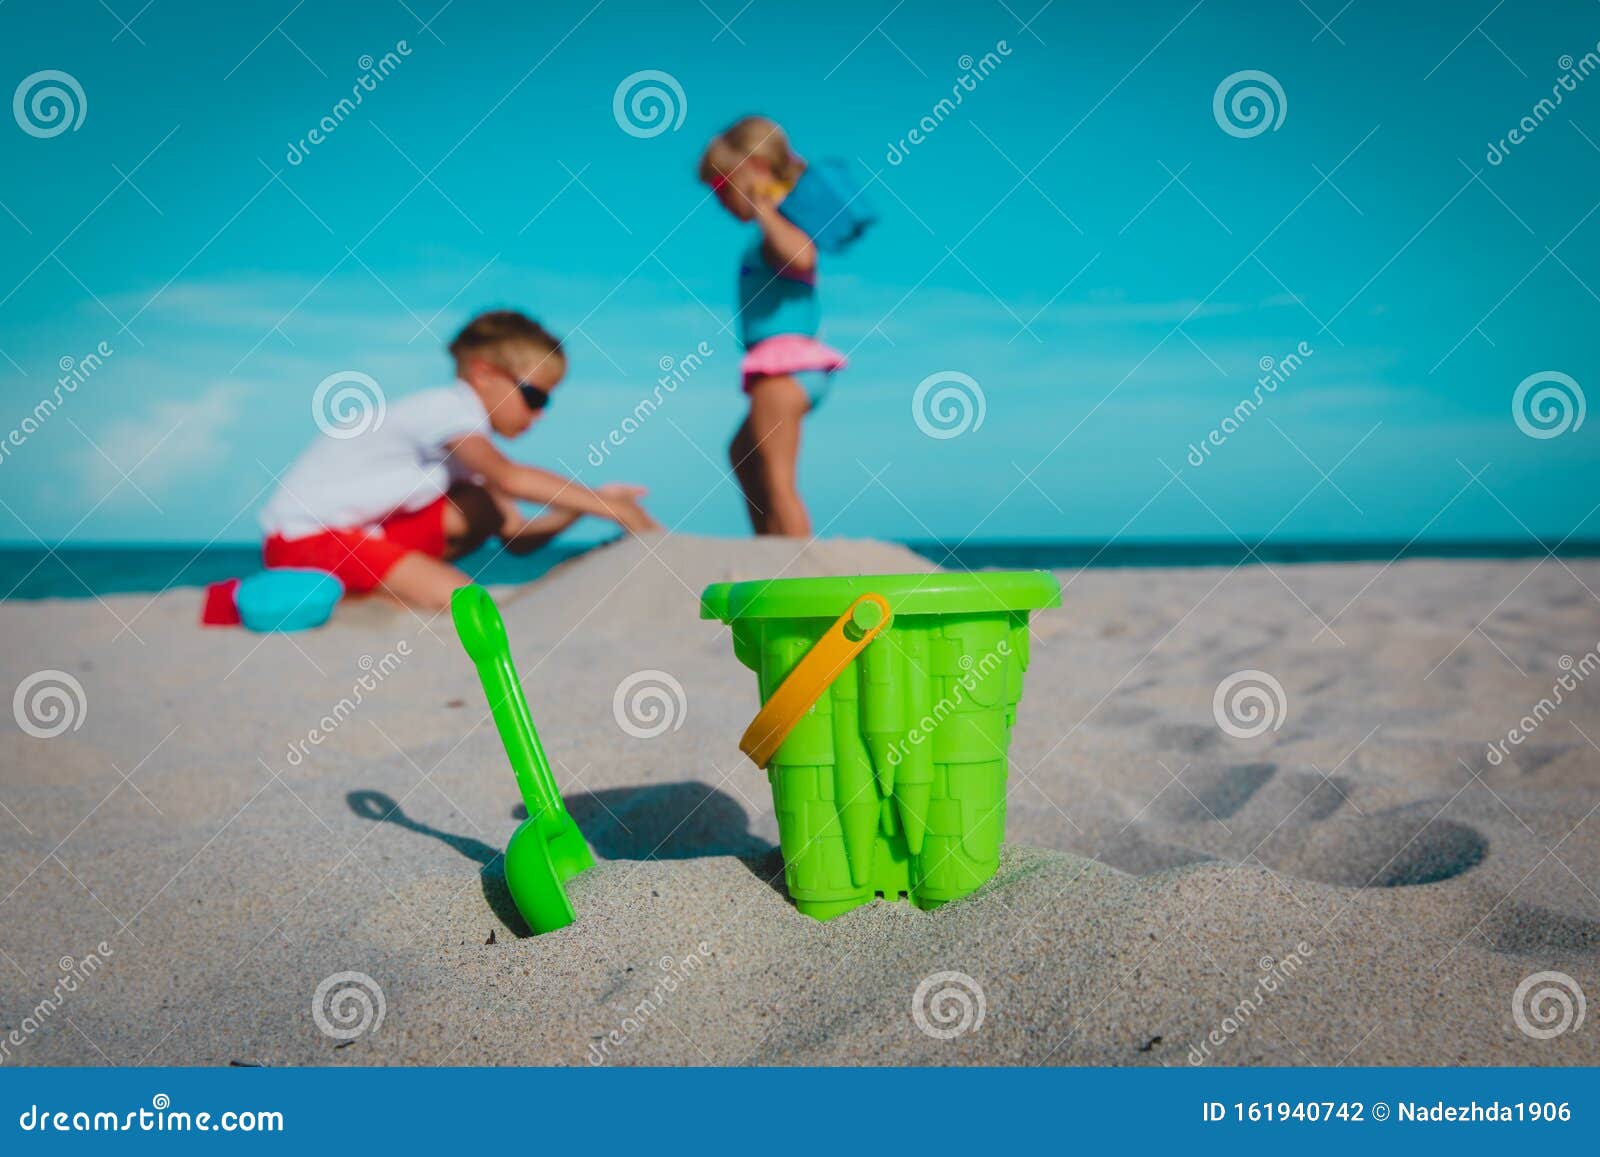 Toys and Kids Playing on the Beach Stock Photo - Image of children ...